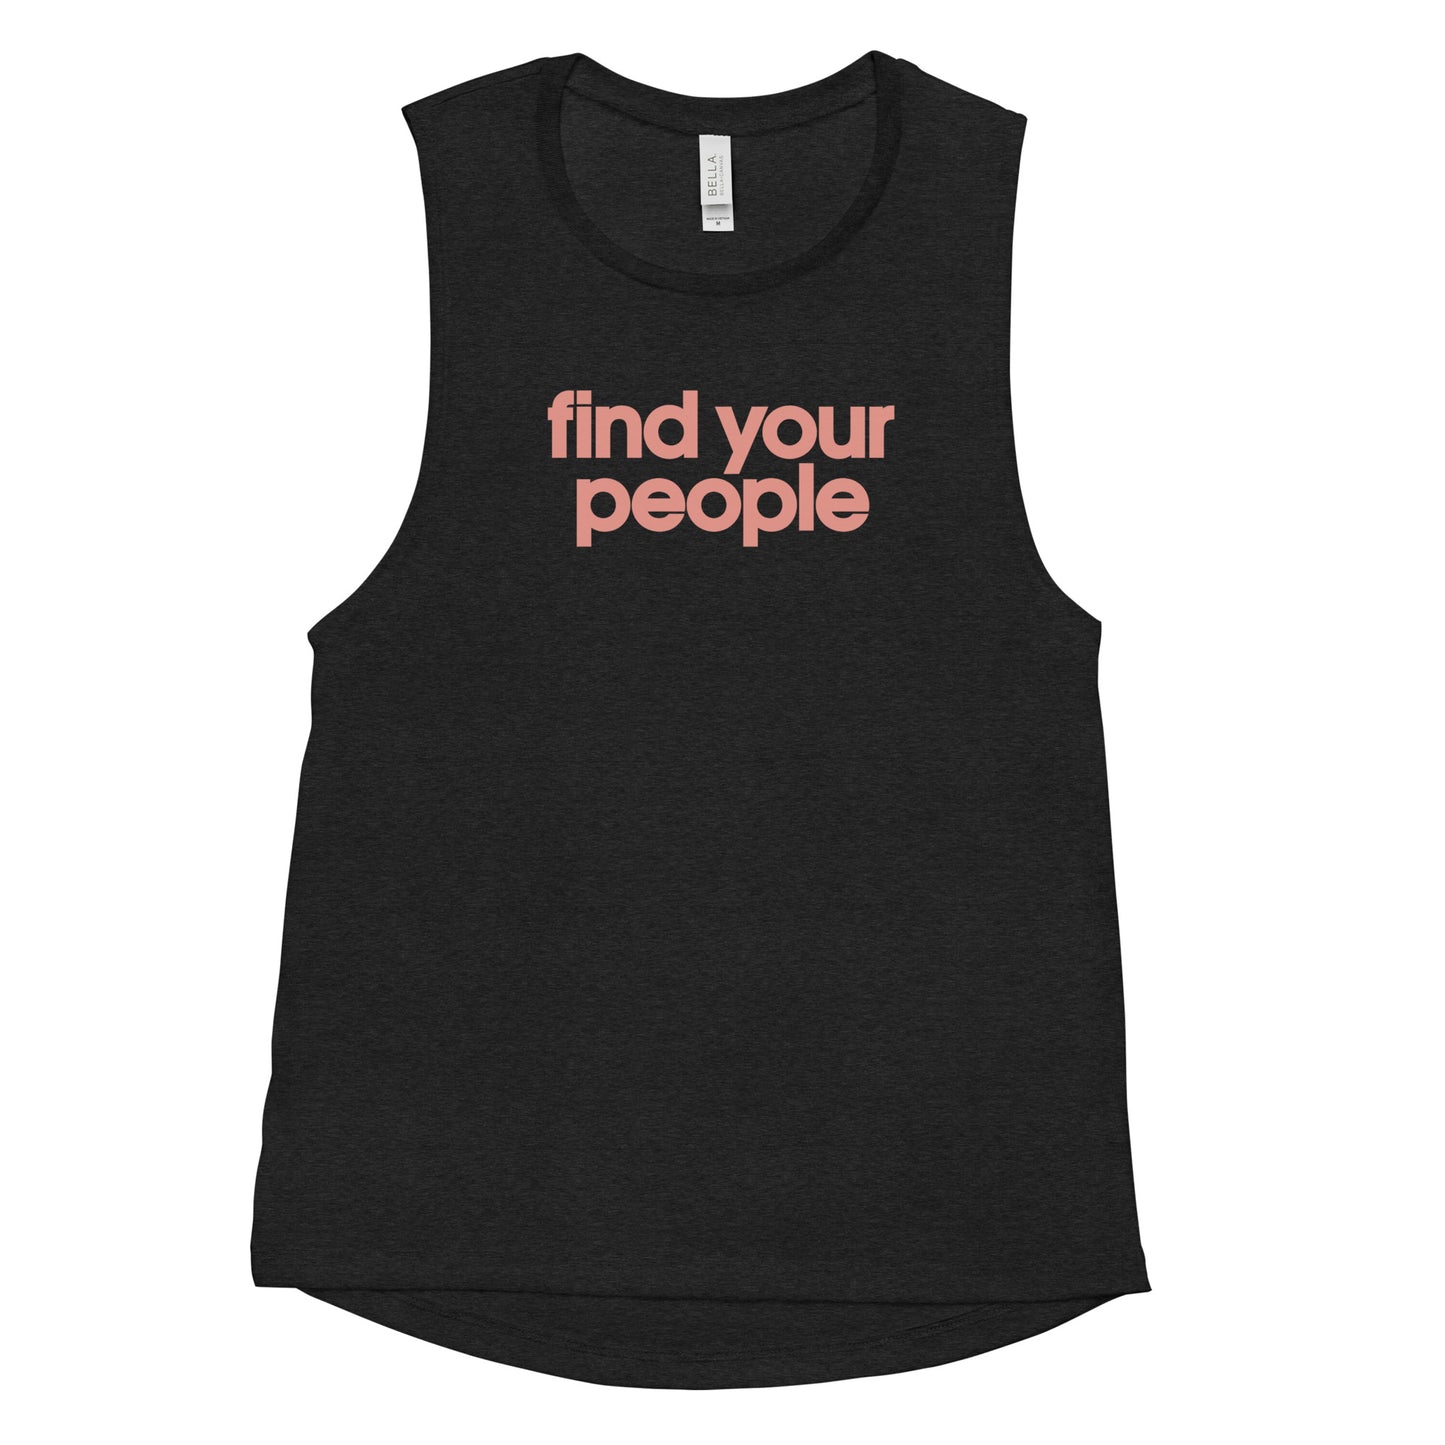 Ladies’ Muscle Tank - Find your people